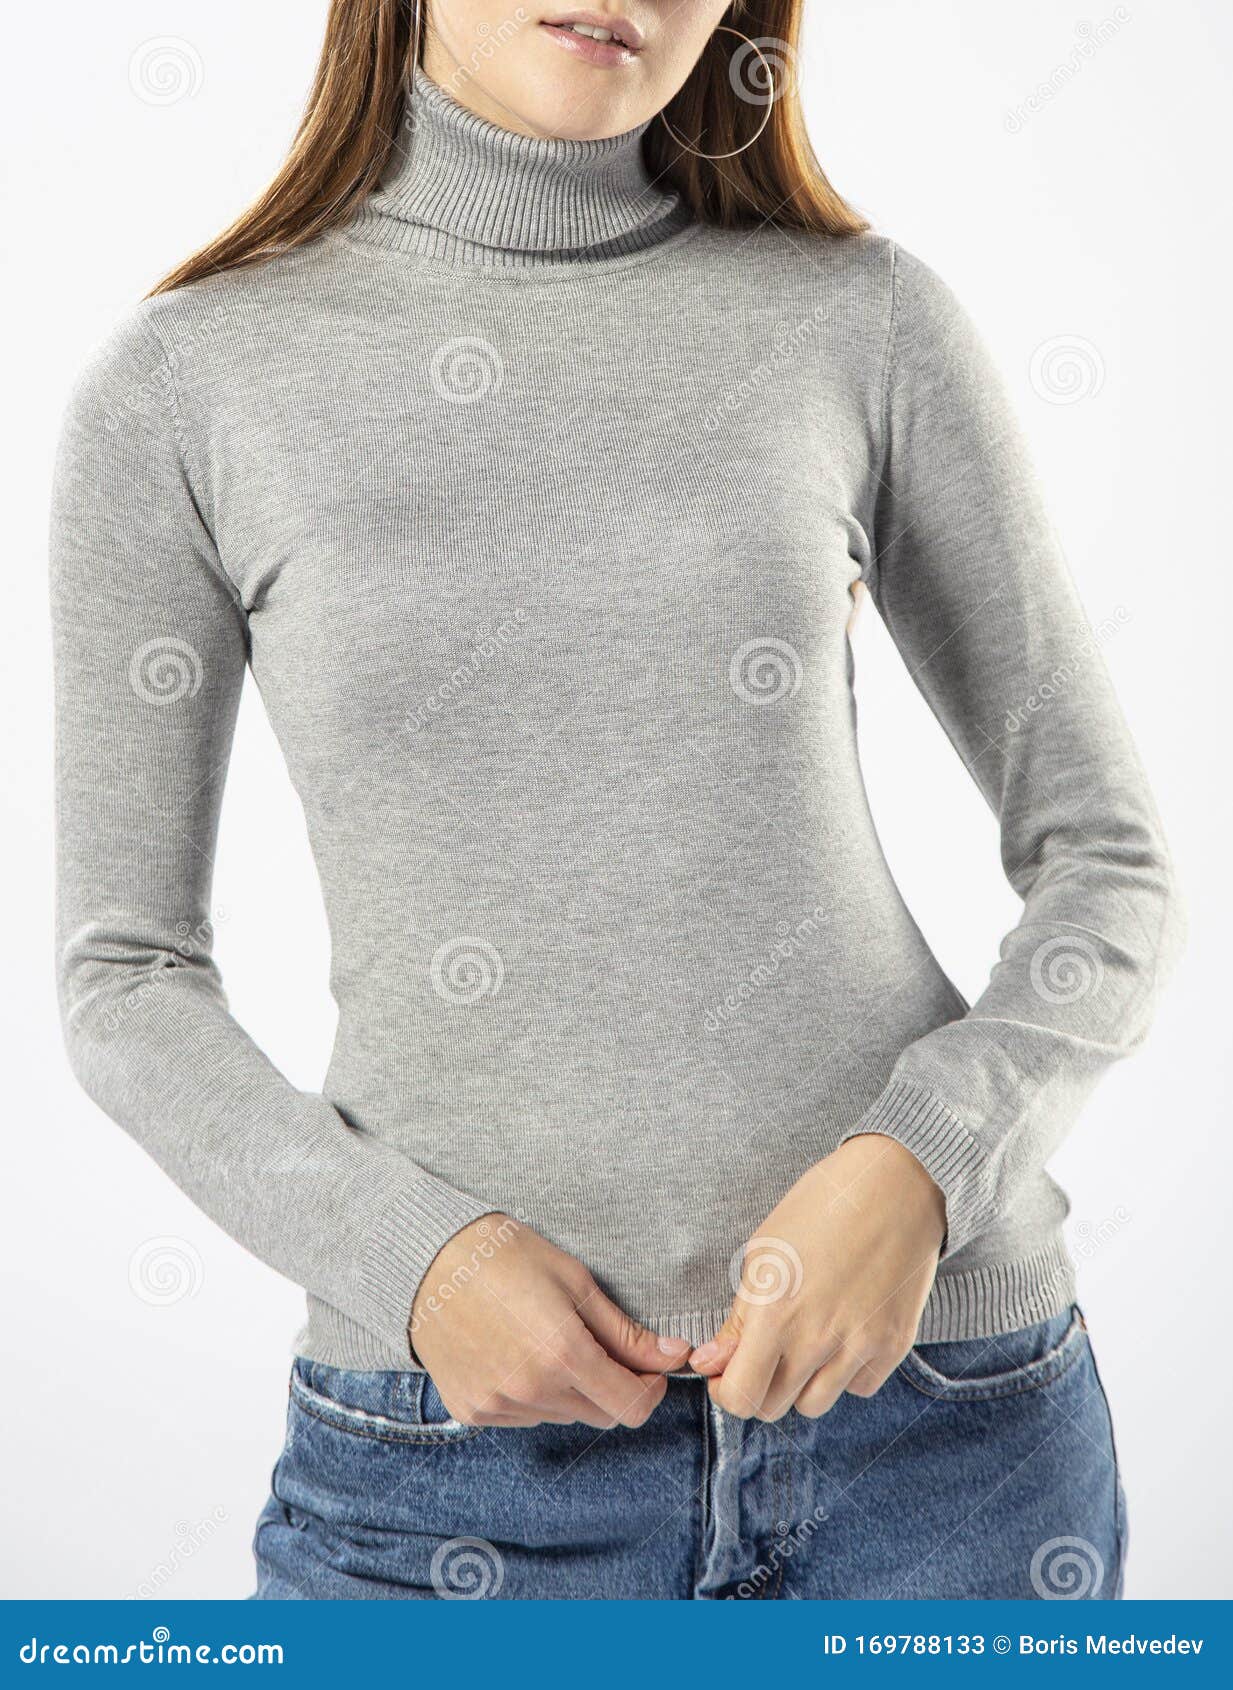 Girl in a Gray Turtleneck Sweater and Blue Jeans on a White Background  Stock Image - Image of cheerful, autumn: 169788133